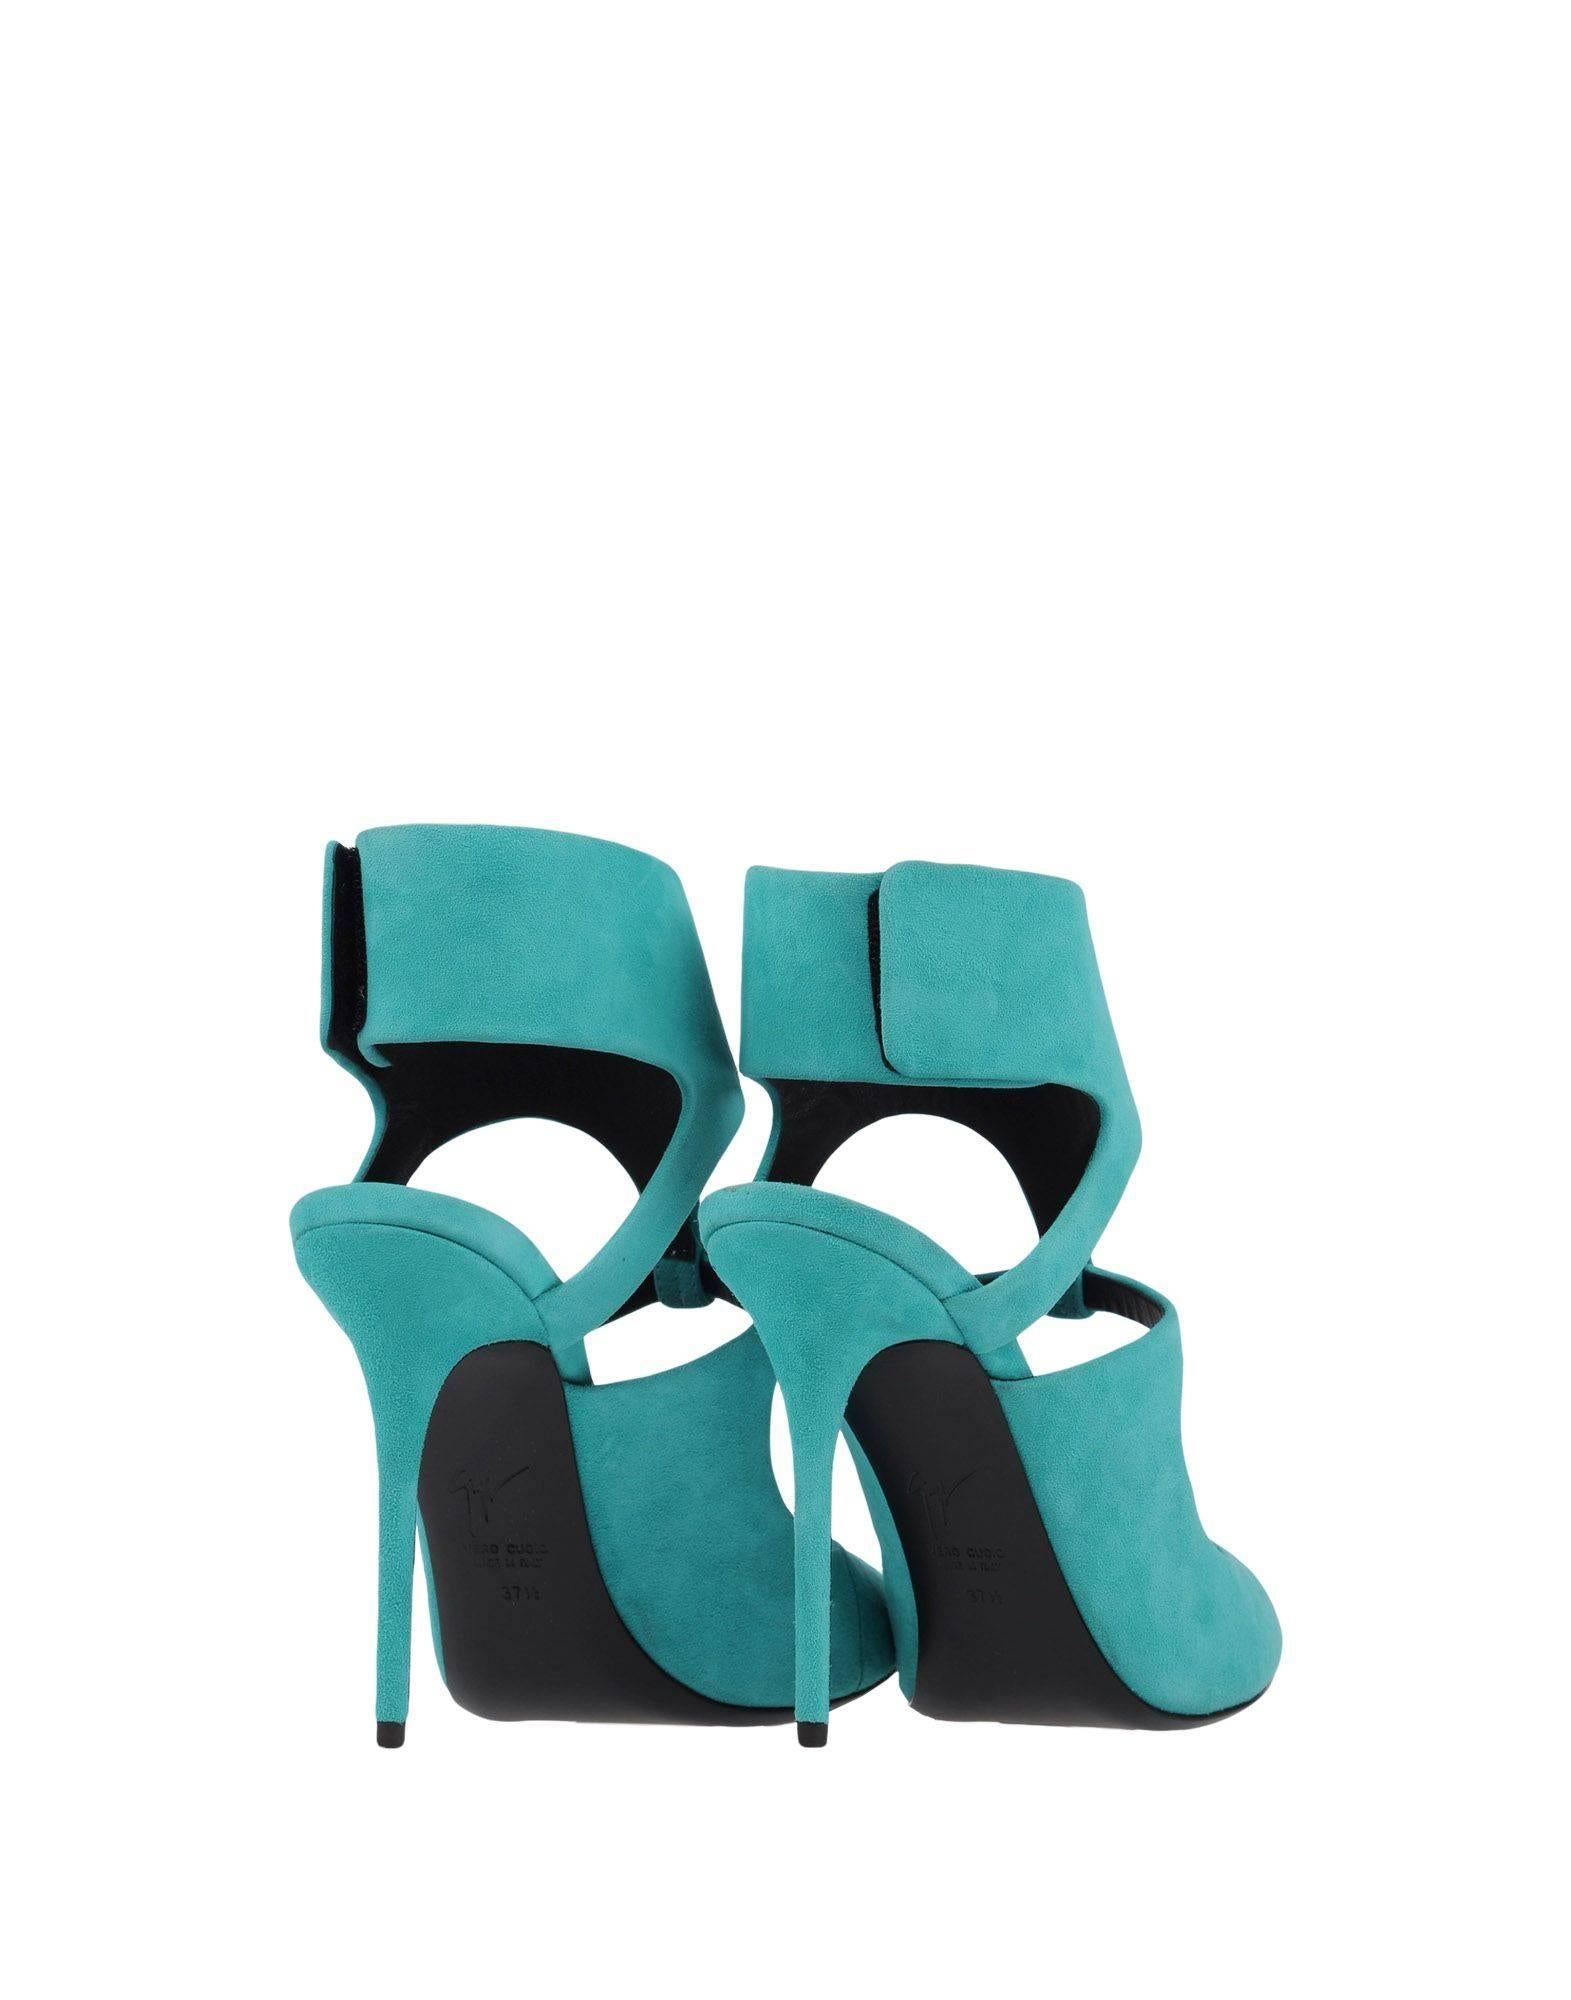 Women's Giuseppe Zanotti New Teal Green Suede Cut Out Evening Sandals Heels in Box